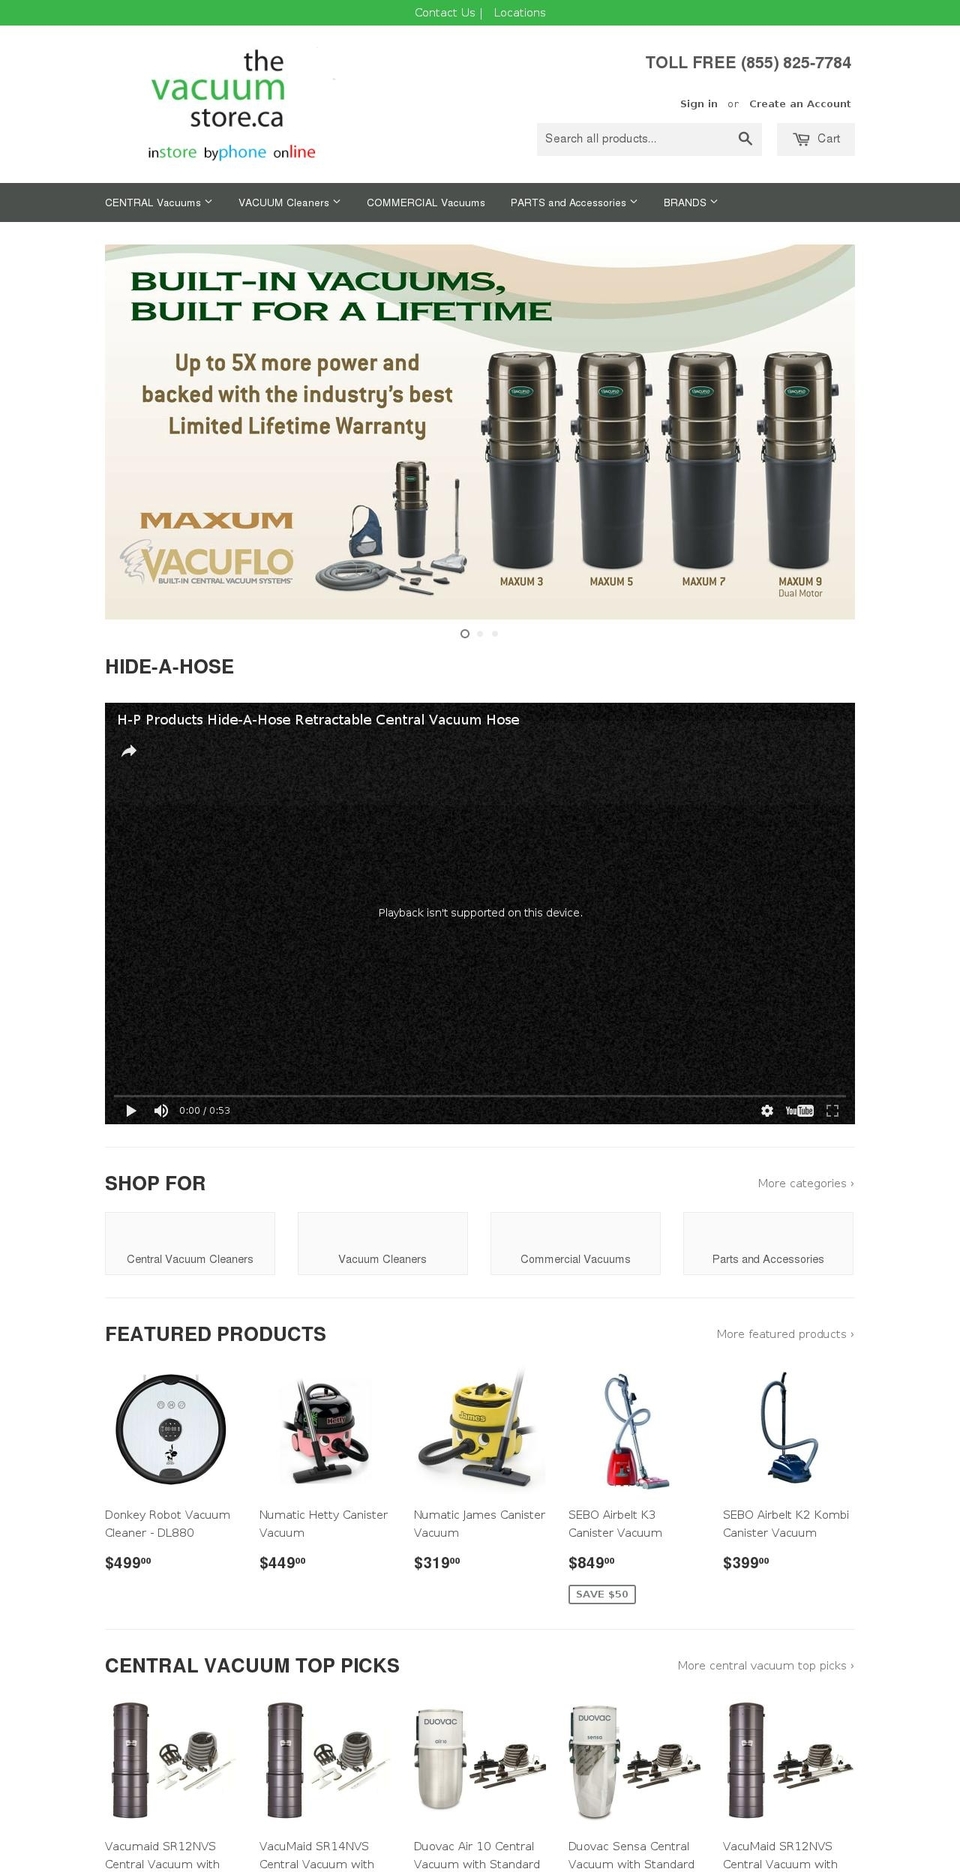 Pursuit Shopify theme site example thevacuumstore.ca